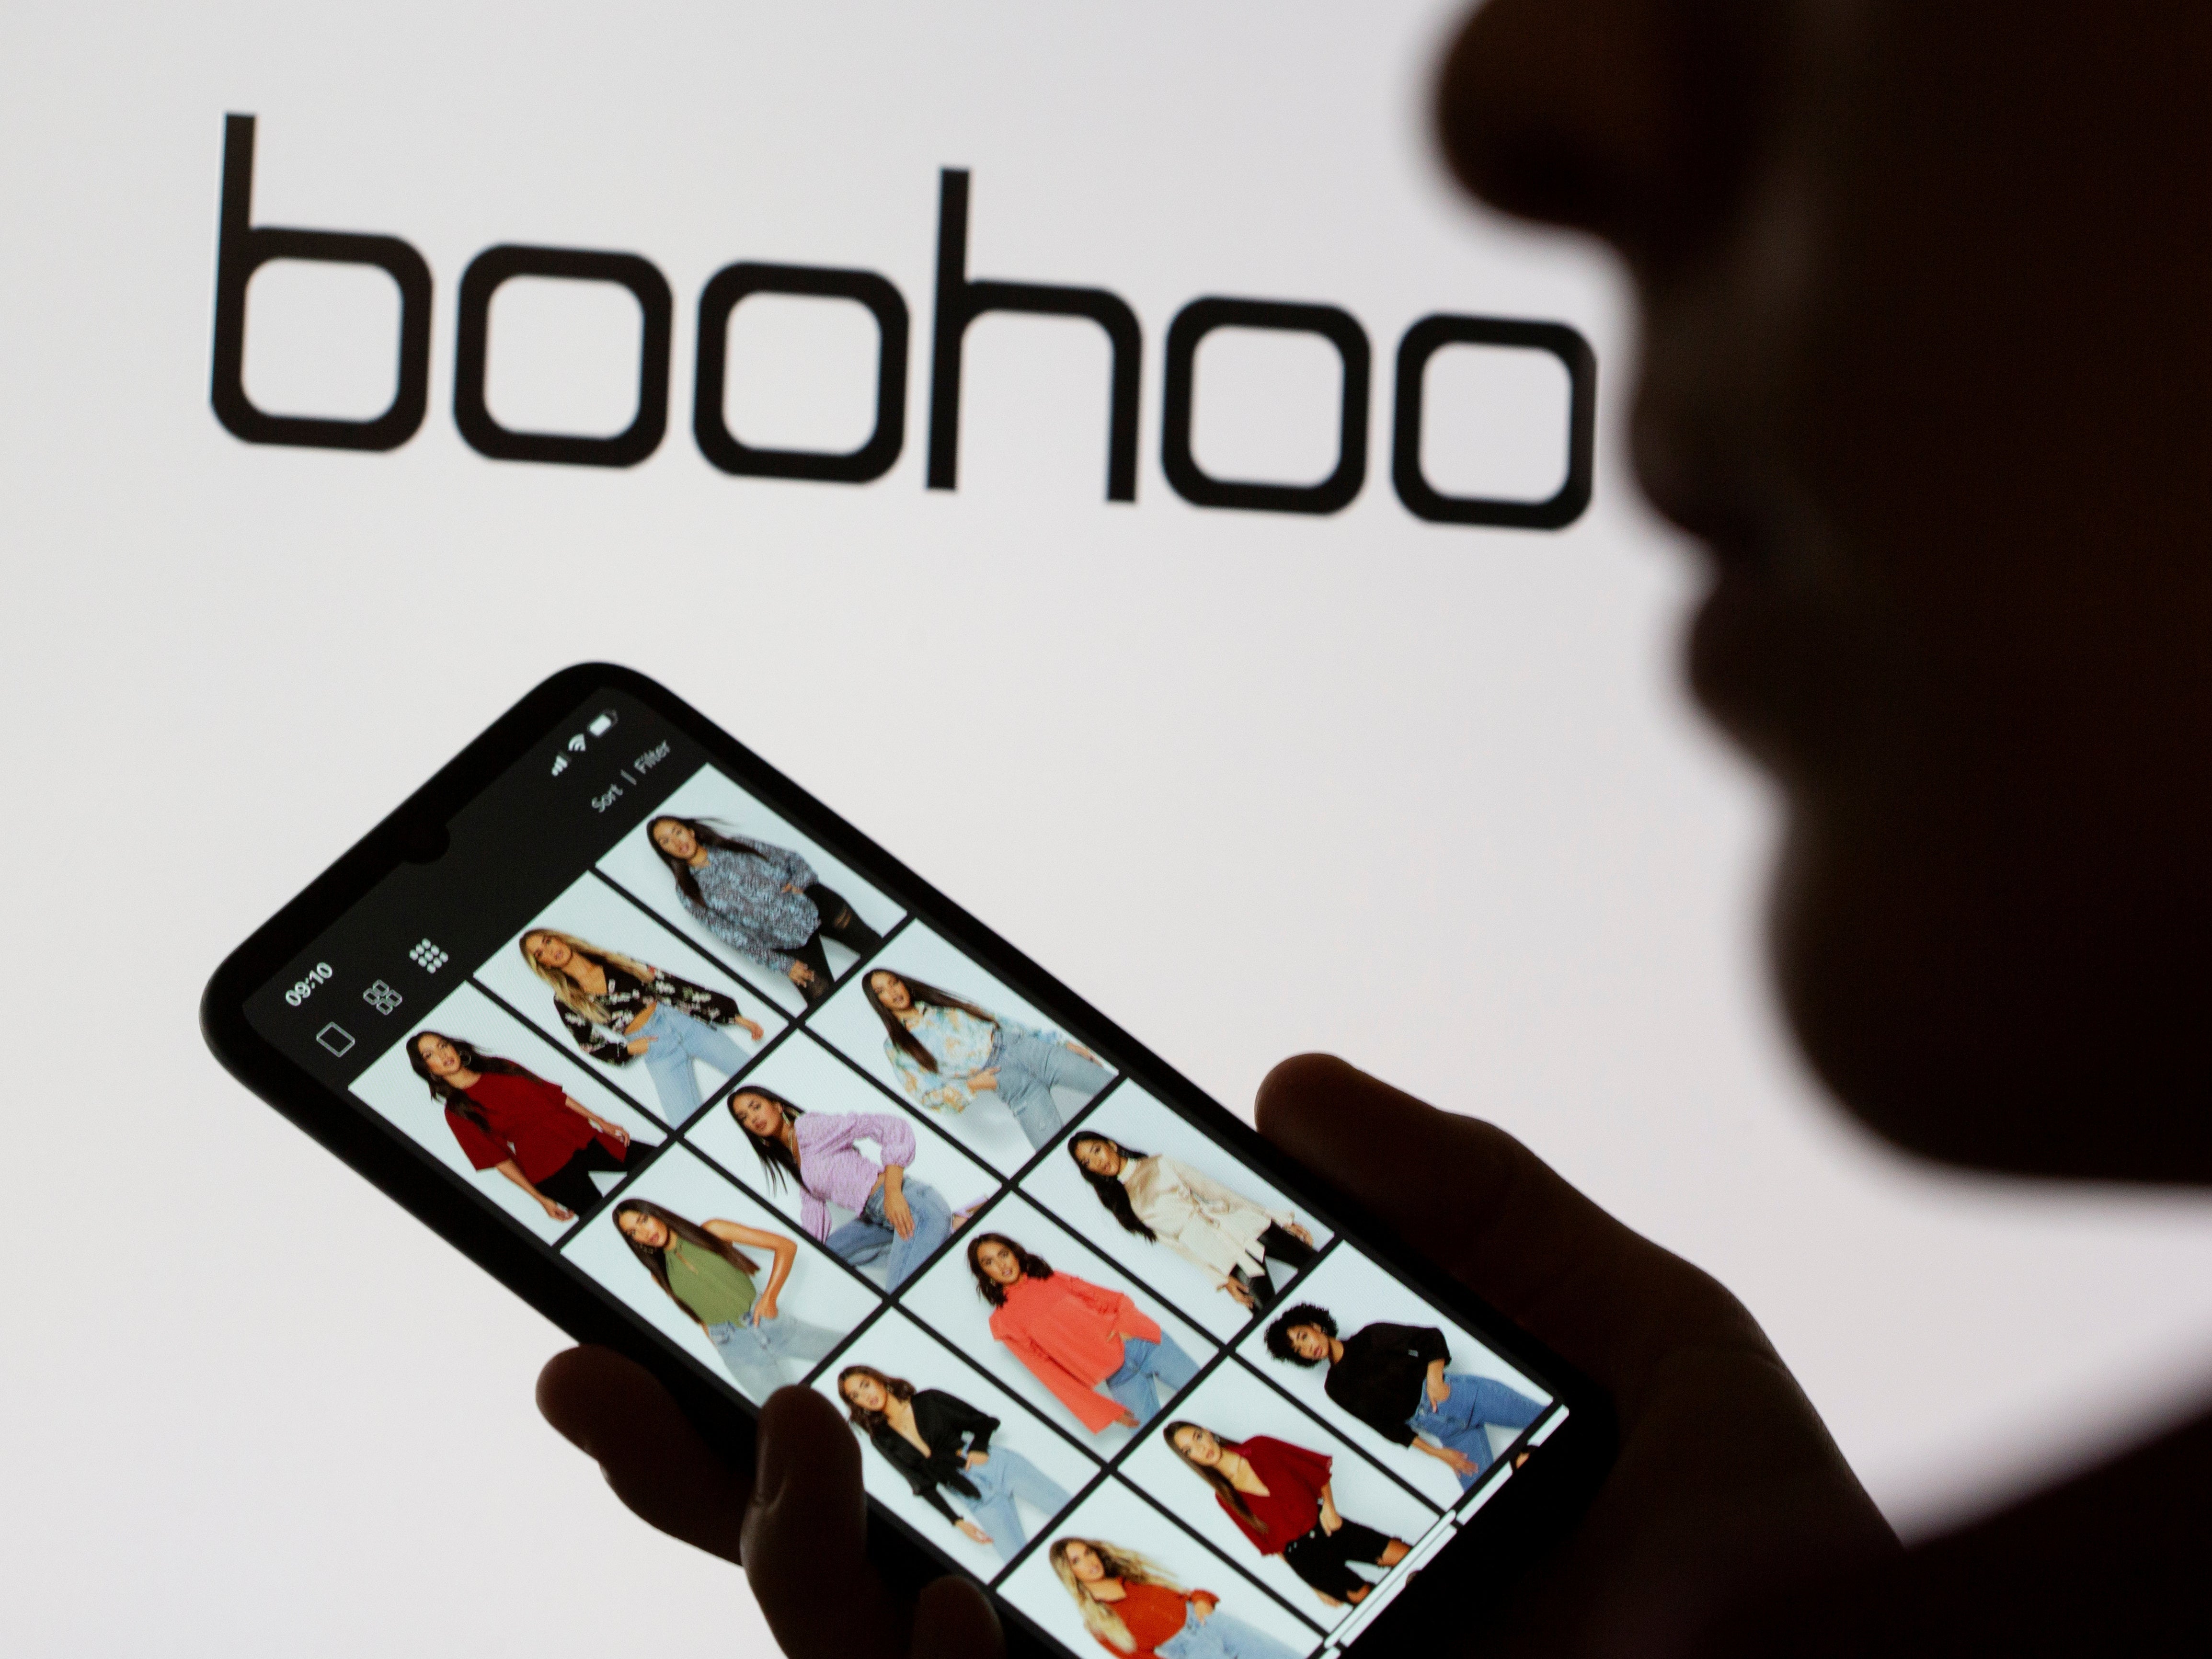 Boohoo’s revenues surged by 32 per cent when compared to a very strong first quarter this time last year